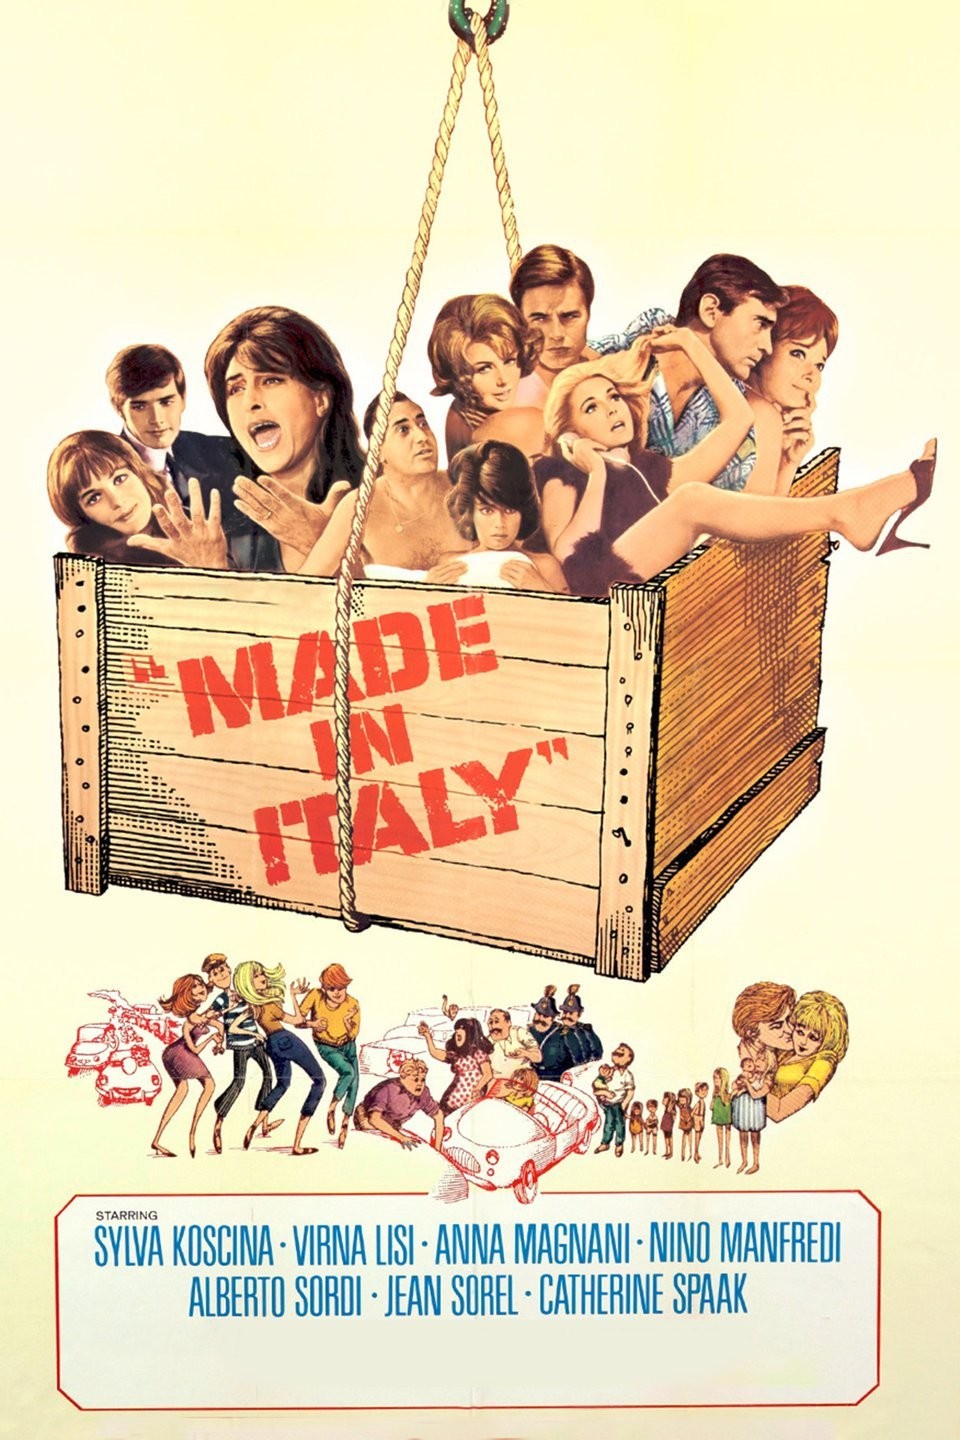 Made in Italy - Rotten Tomatoes